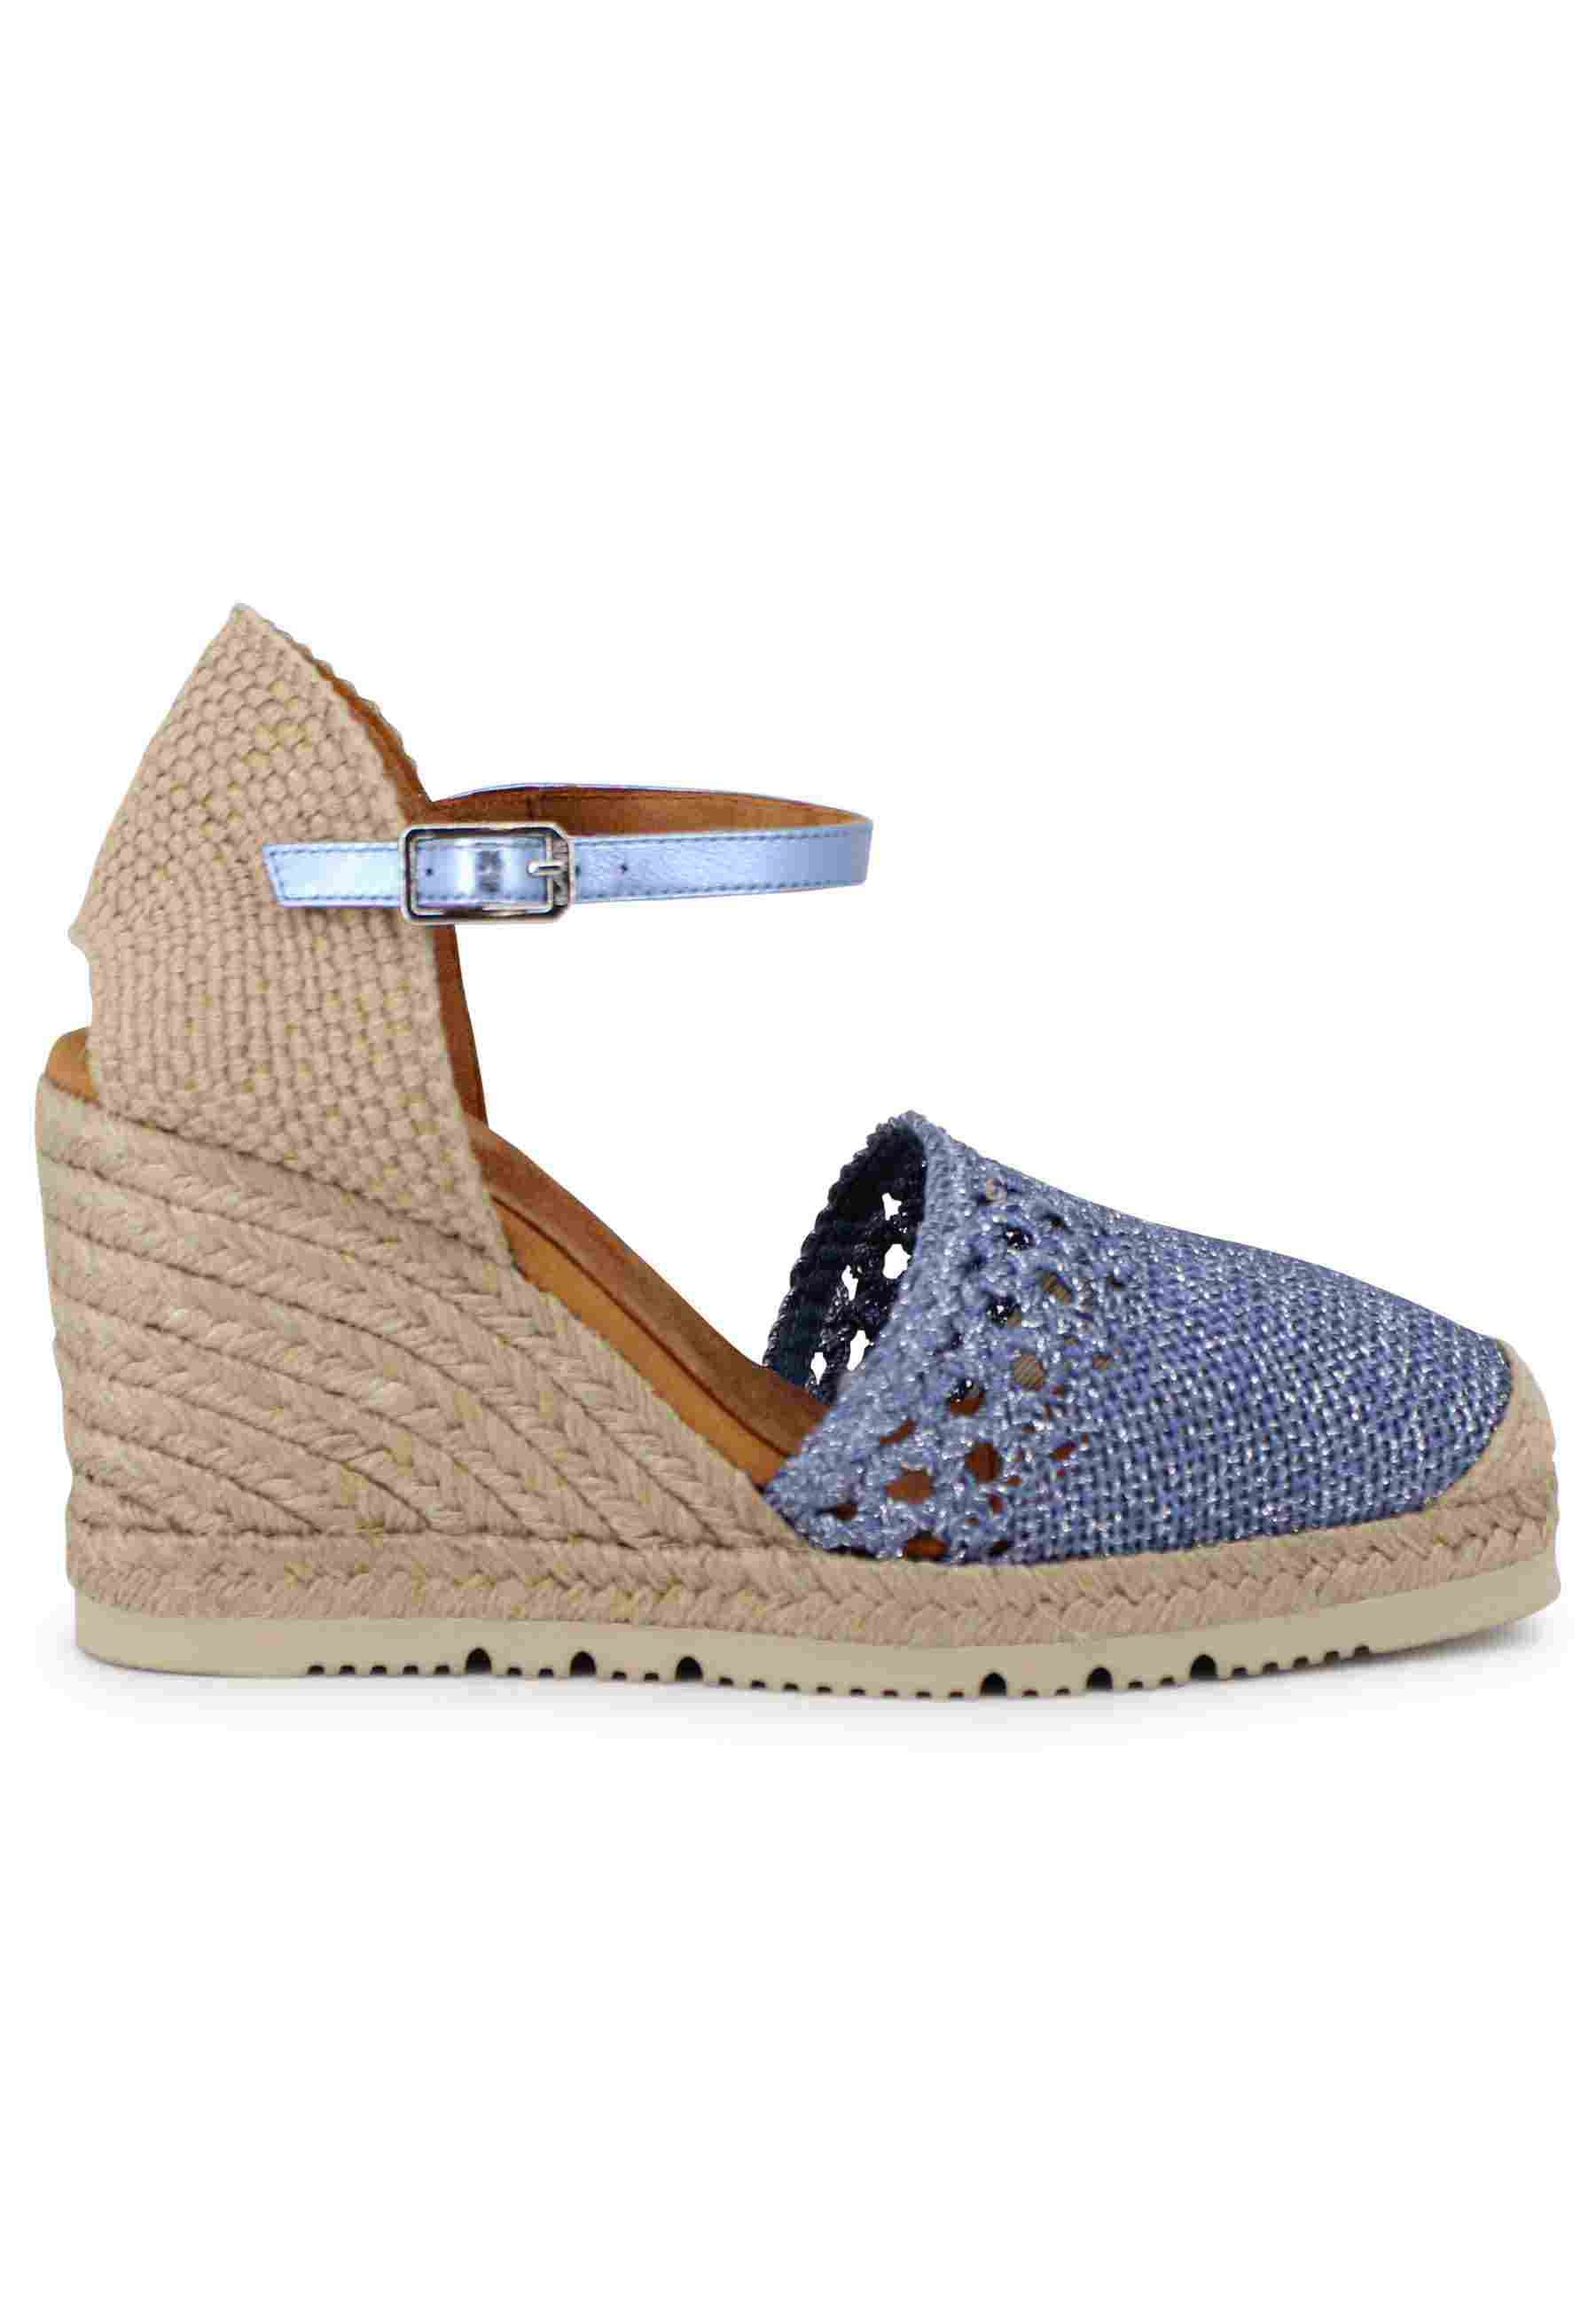 Women's espadrilles sandals in blue laminated fabric with ankle strap and high wedge